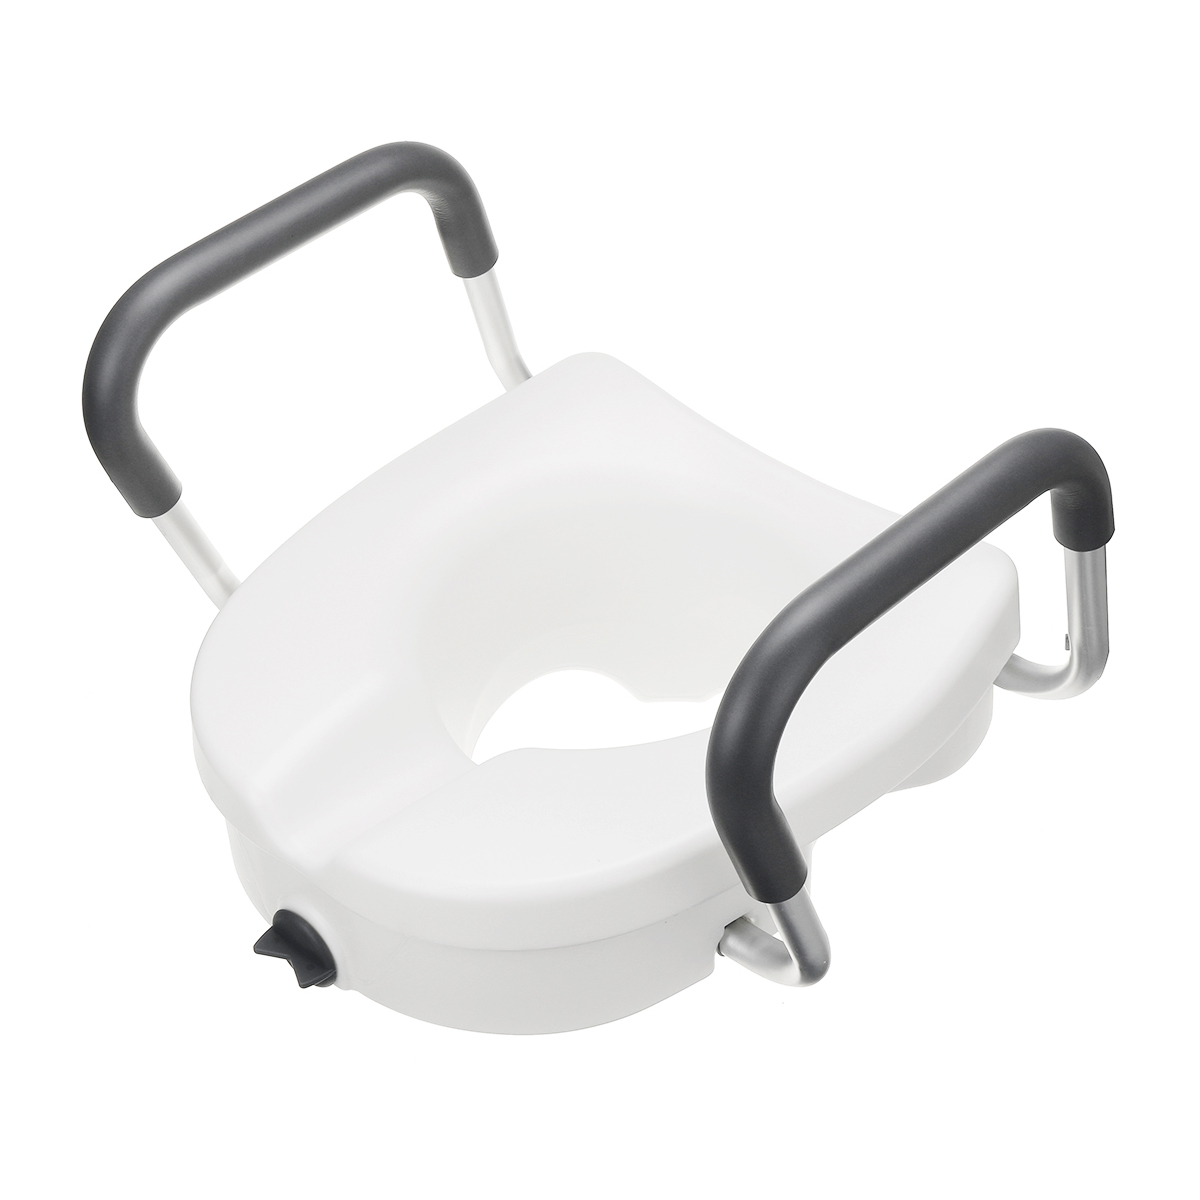 Removable Raised Toilet Seat With Arms Handles Padded Disability Aid Elderly Supports 7